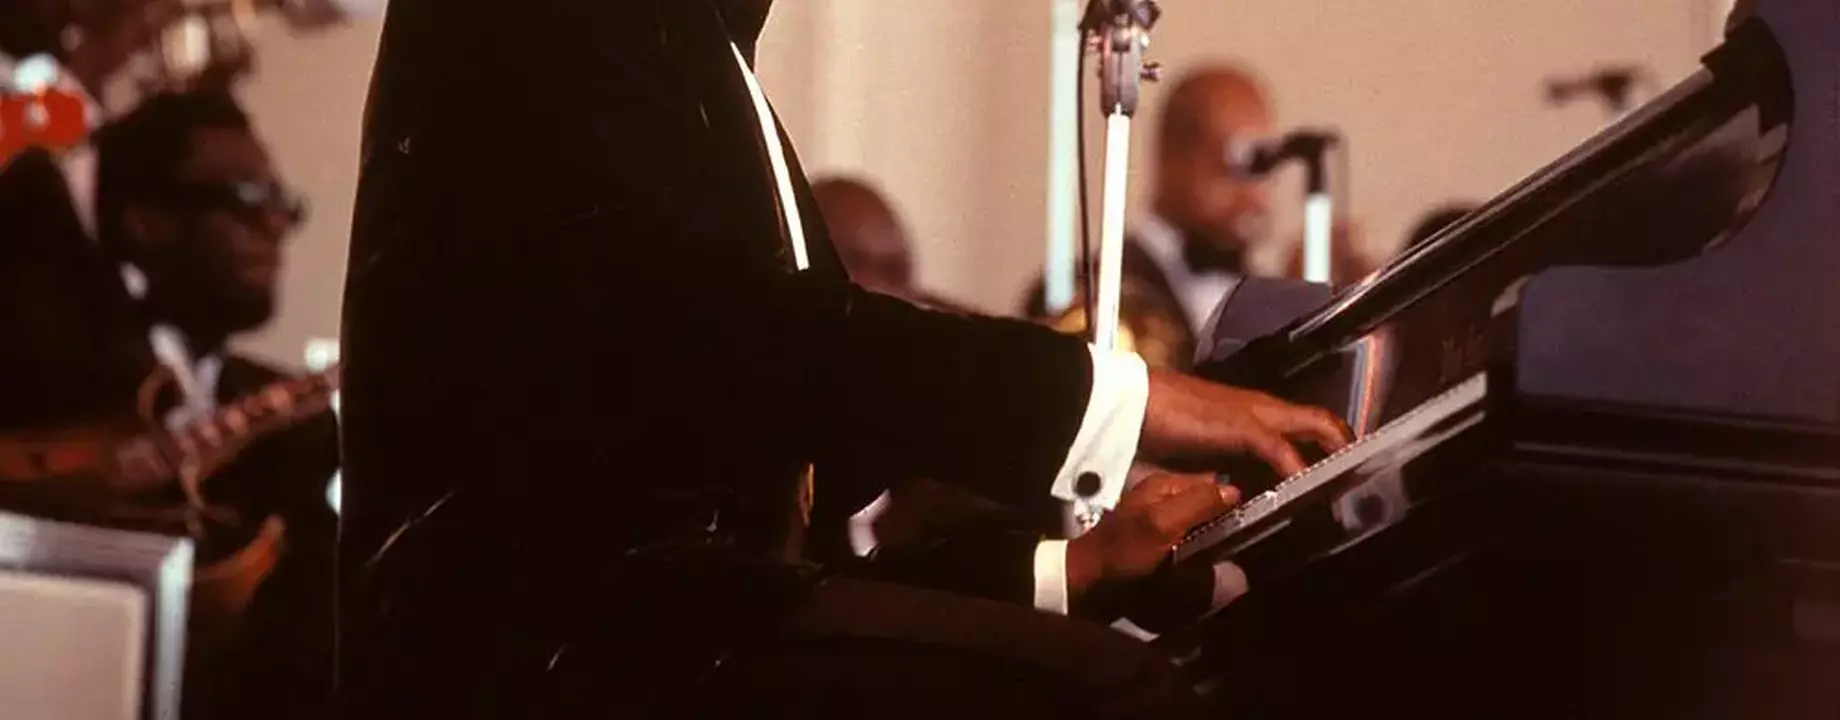 Ray Charles Getty Images 84881589 1000x600